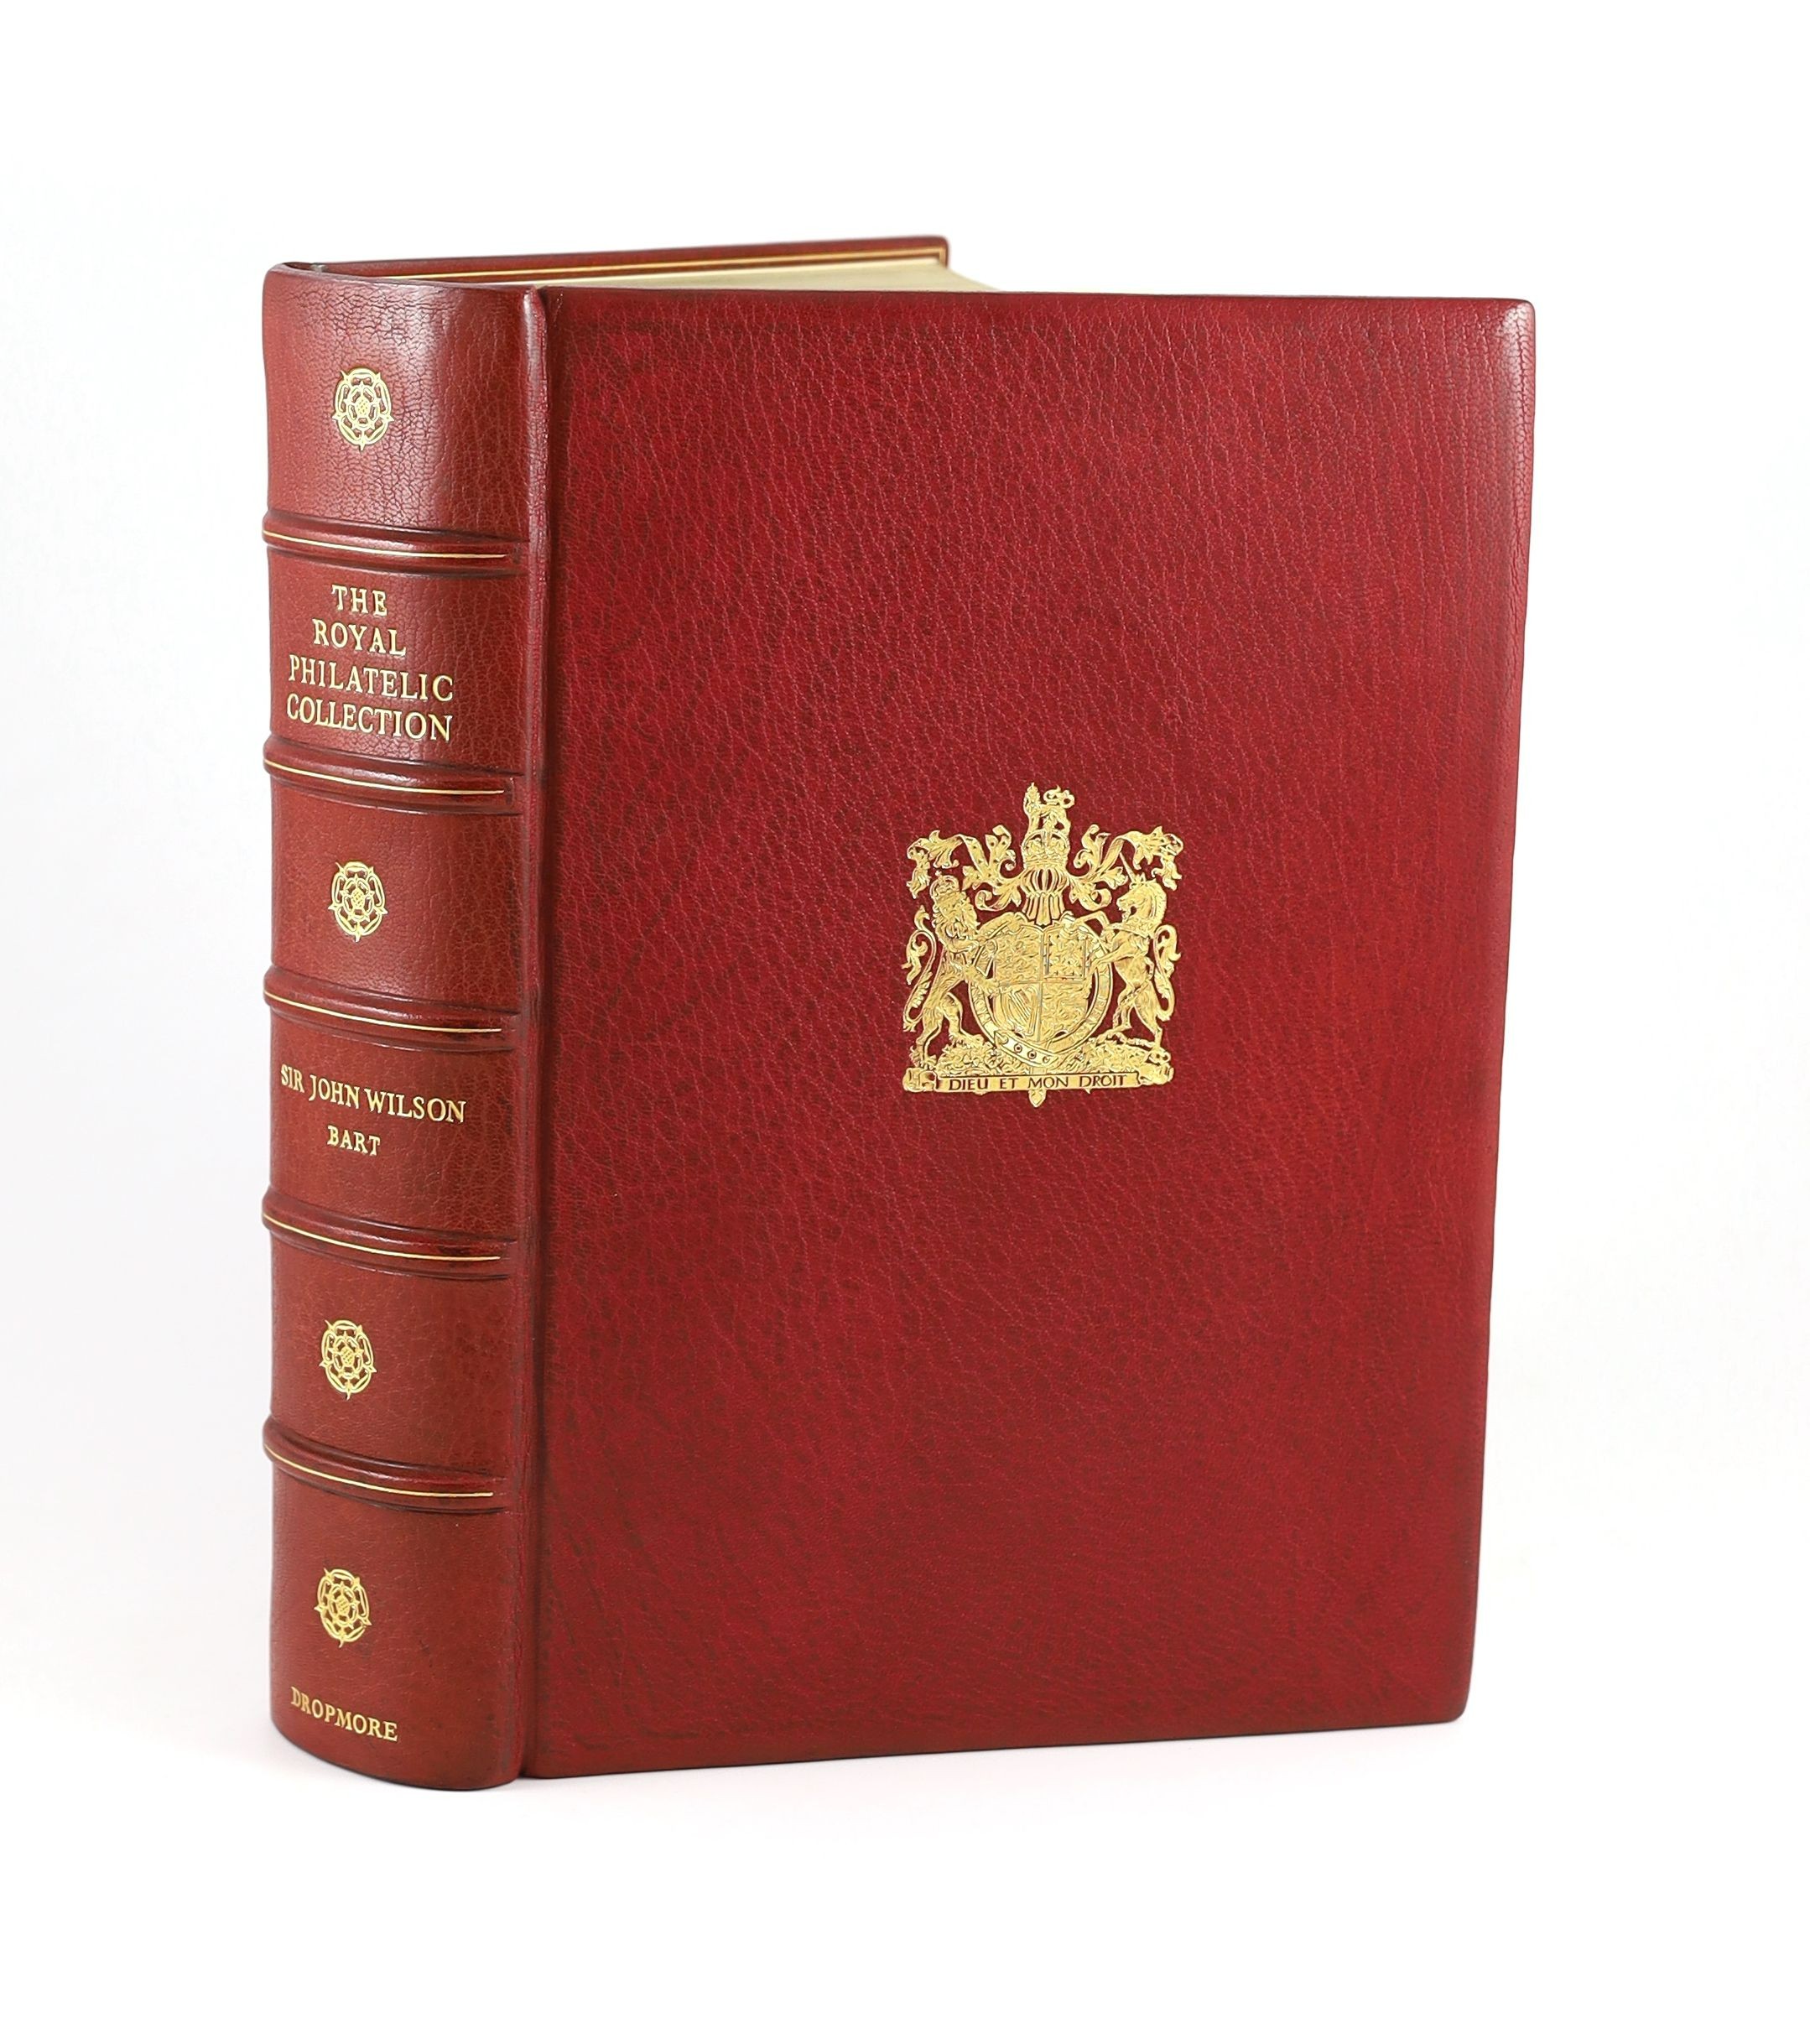 Wilson, Sir John - The Royal Philatelic Collection, with frontis portrait of King George VI, folio, crushed red morocco, with gilt Royal Coat of Arms, with 60 plates of which 12 are in colour, Viscount Kemsley at the Dro